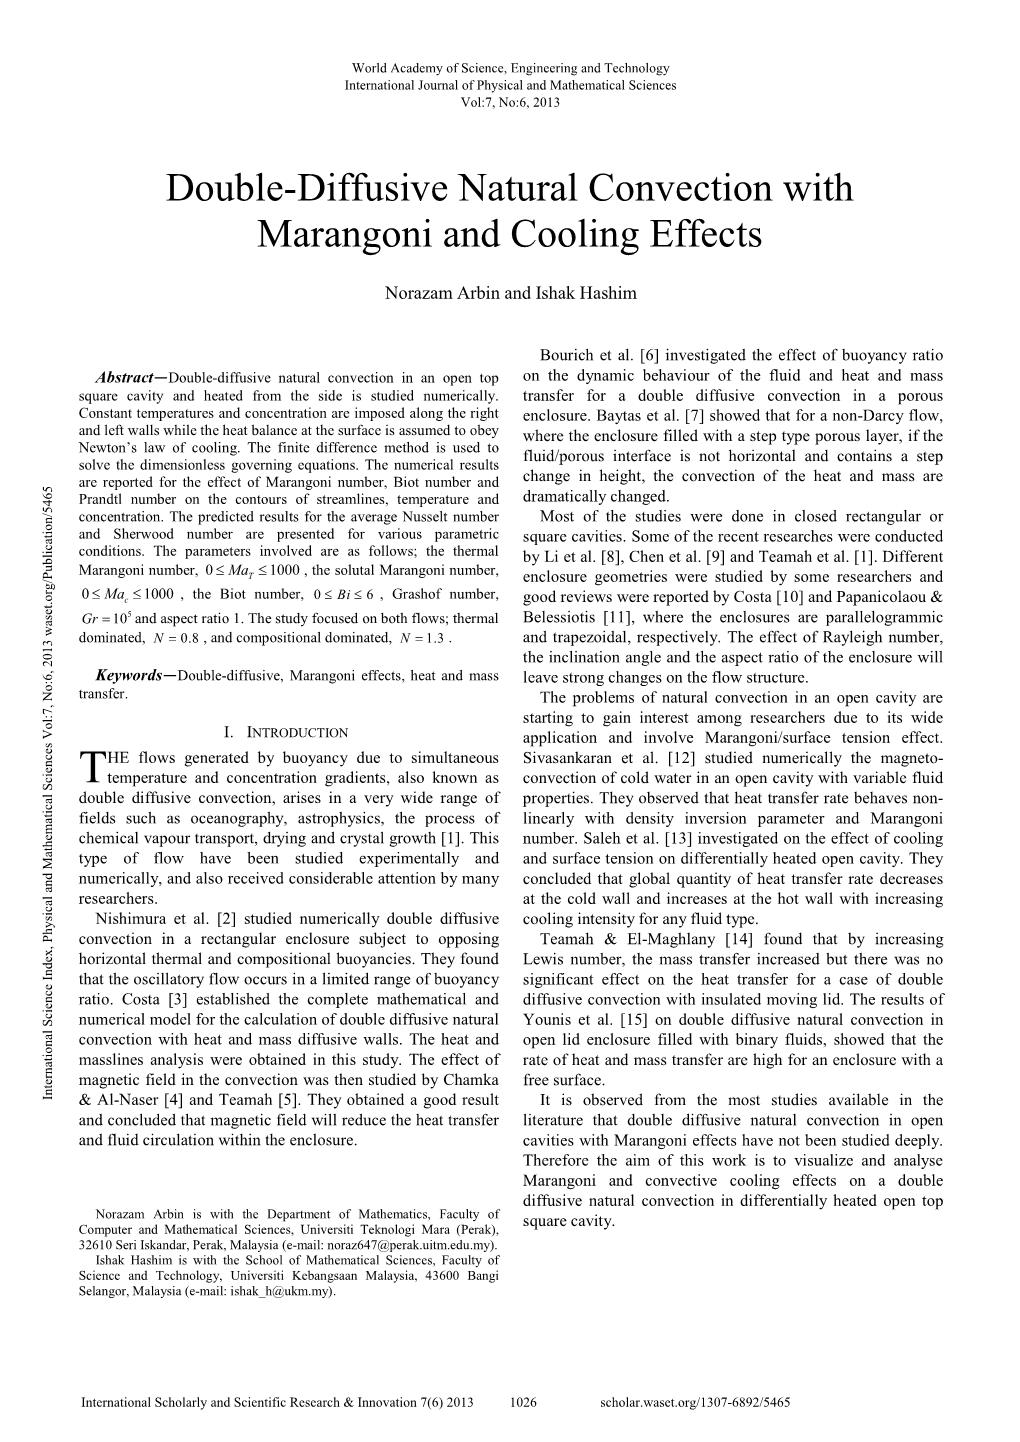 Double-Diffusive Natural Convection with Marangoni and Cooling Effects